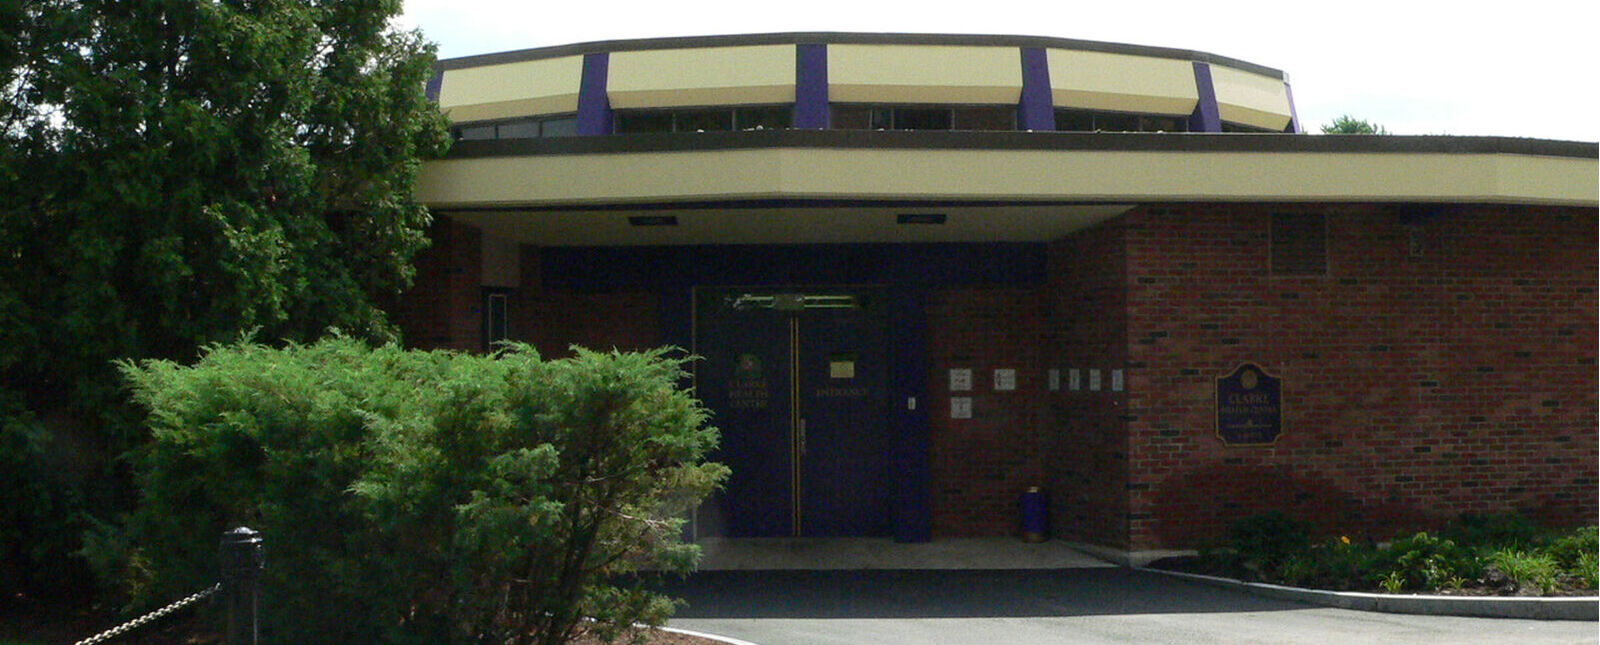 The entrance to the Clarke Health Center